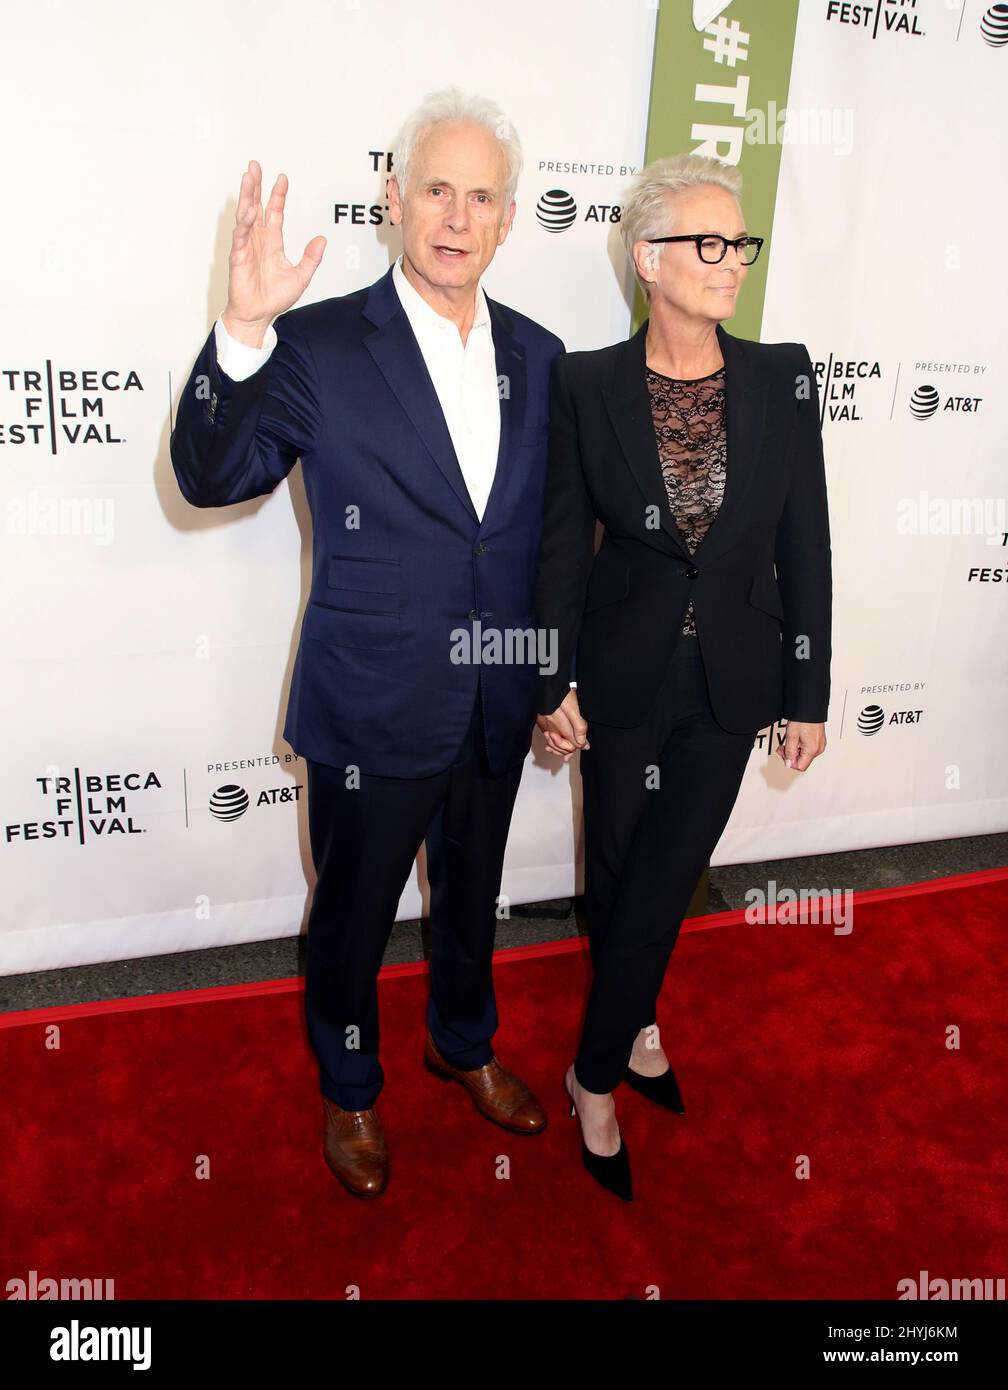 Christopher Guest & Jamie Lee Curtis attending the 2019 Tribeca Film Festival 'This is Spinal Tap' 35th Anniversary held at the Beacon Theatre on April 27, 2019 in New York Stock Photo